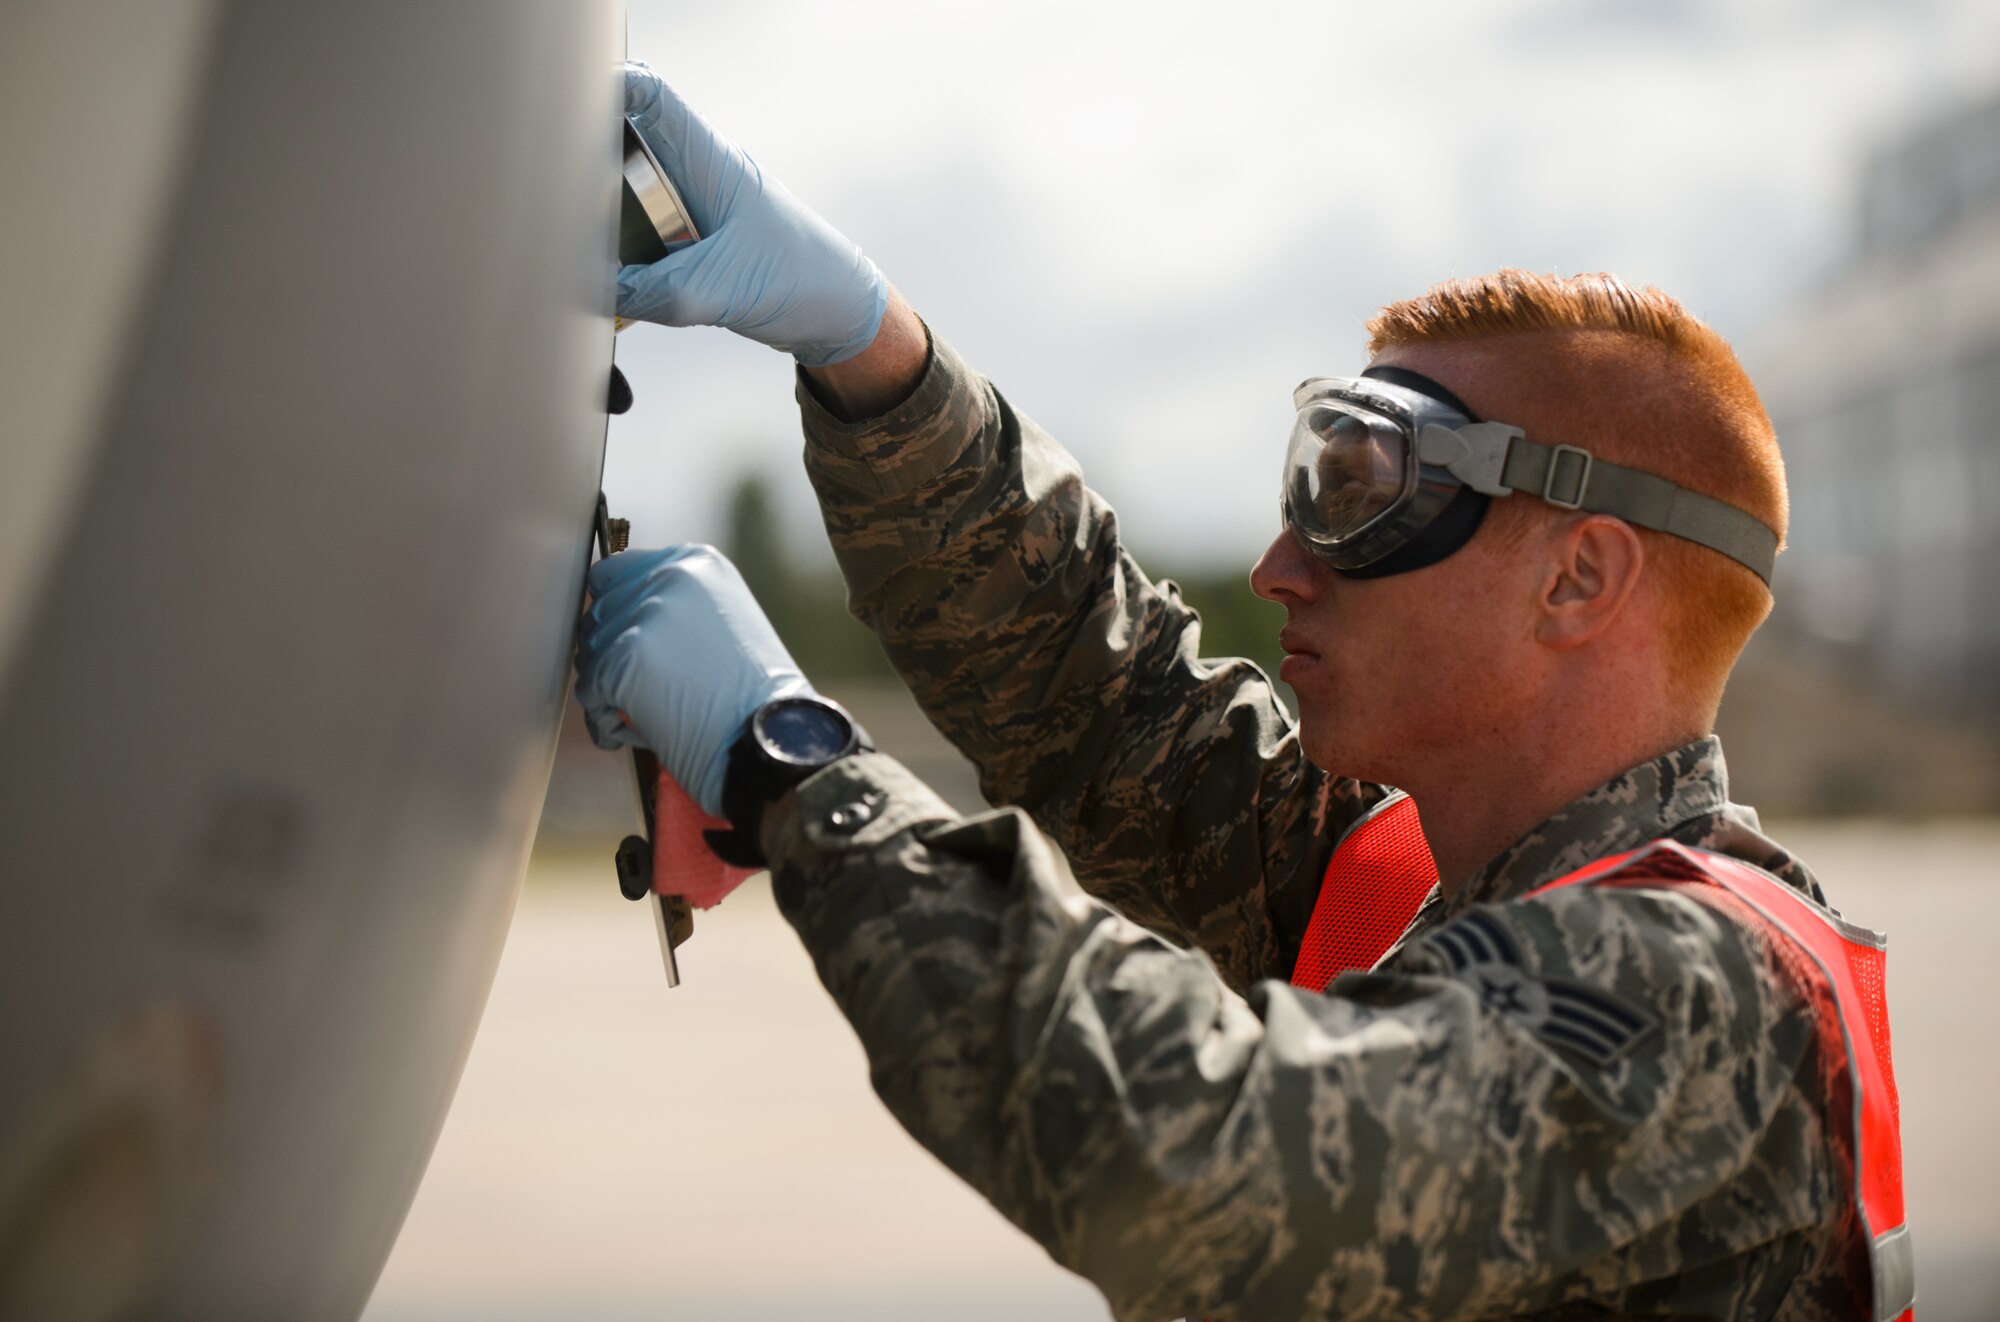 Senior Airman Cody Prelec, Pennsylvania Air National Guard crew chief, changes the oil on a KC-135 Stratotanker engine June 9, 2015 at Riga International Airport, Latvia. Guardsmen from Maryland, Michigan and Pennsylvania came together to support Saber Strike 15 by providing aerial-refueling and close air support. Saber Strike 15 is a joint and multinational exercise designed to promote stability in the Baltic area and provide an opportunity for military members to sharpen their skills. (U.S. Air Force photo/ Staff Sgt. Armando A. Schwier-Morales)